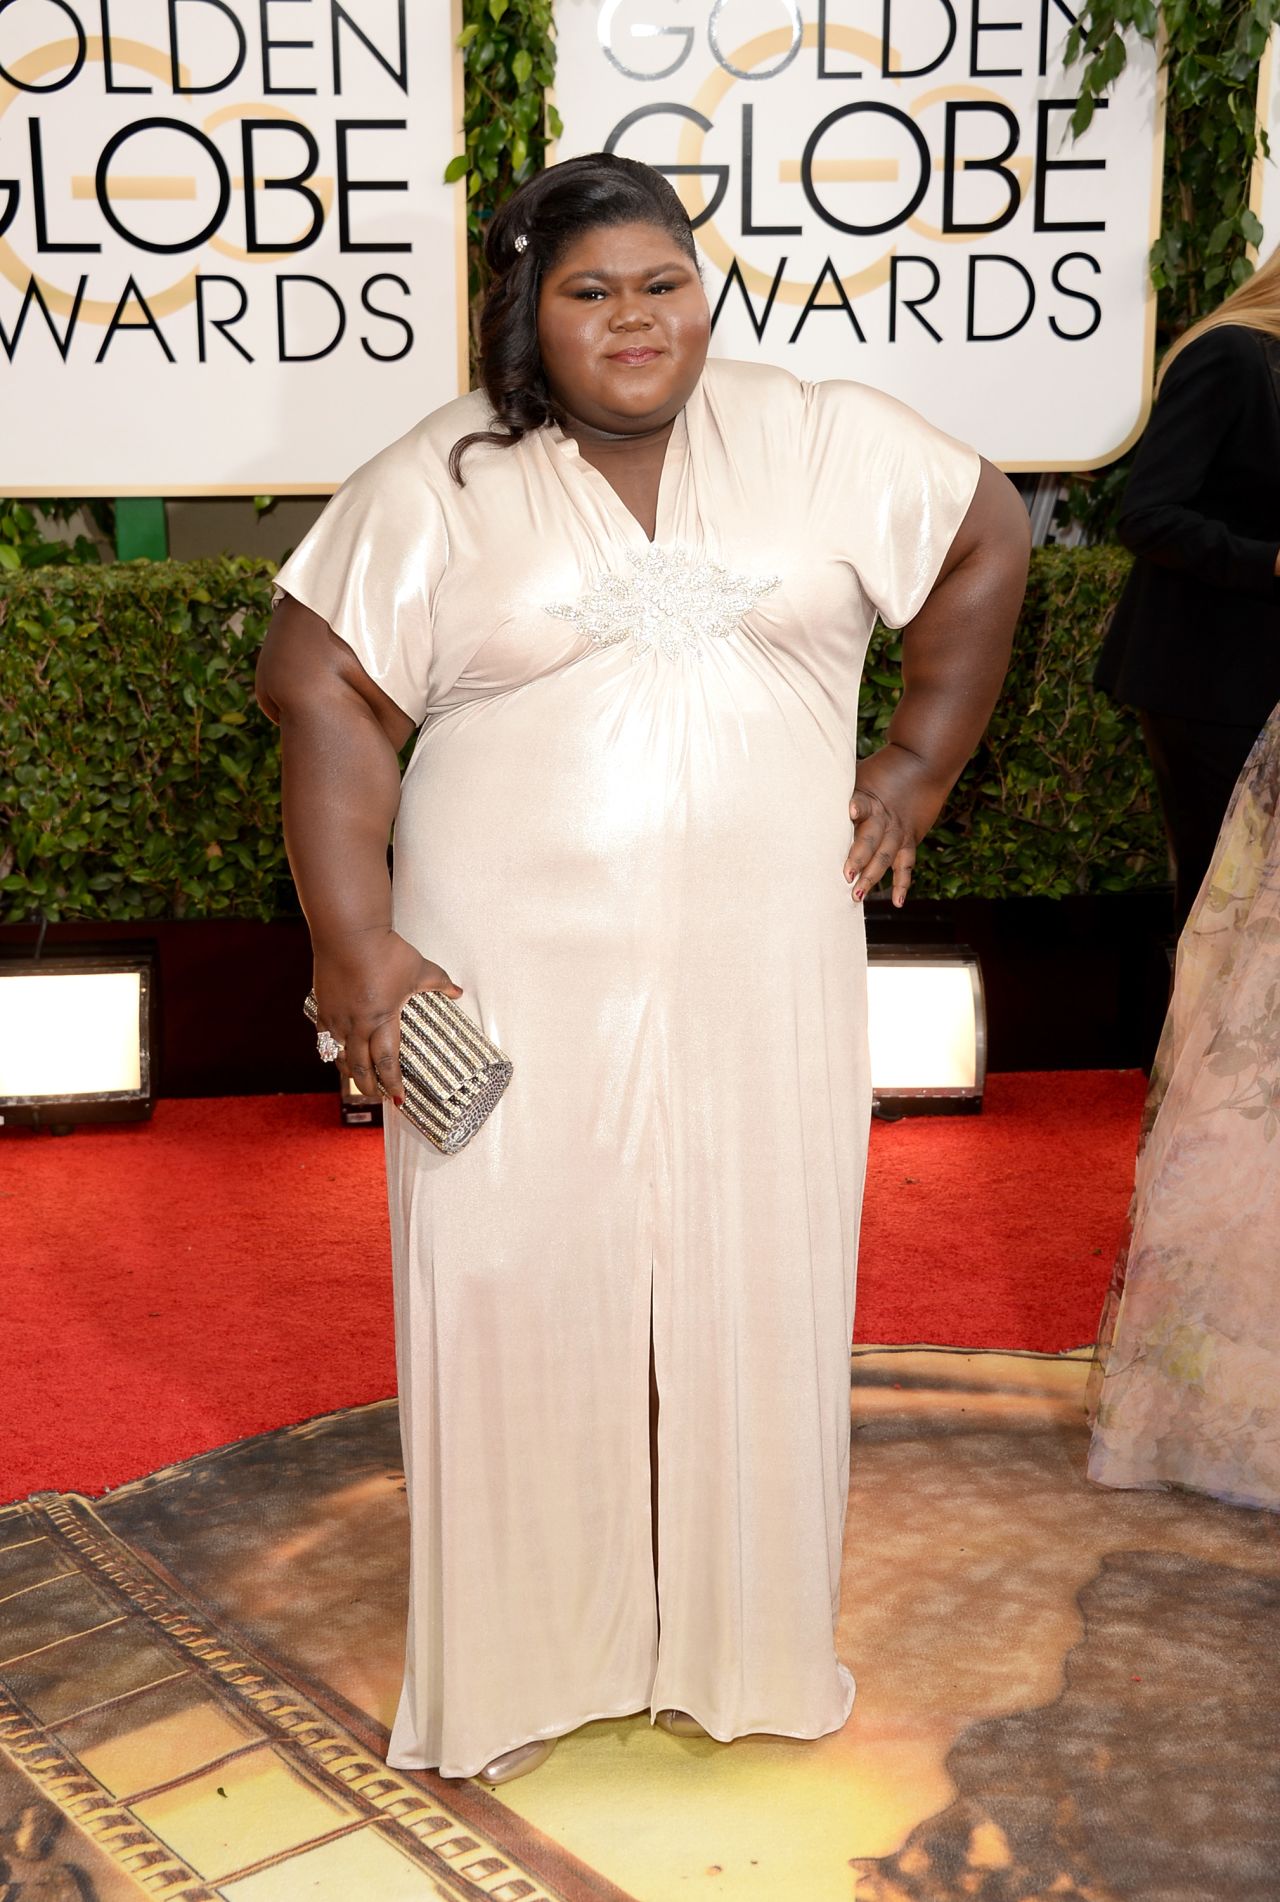 When people took to Twitter to criticize actress Gabourey Sidibe on the Golden Globes red carpet earlier this year, she hit back with the best response ever: "To people making mean comments about my GG pics, I mos def cried about it on that private jet on my way to my dream job last night. #JK"